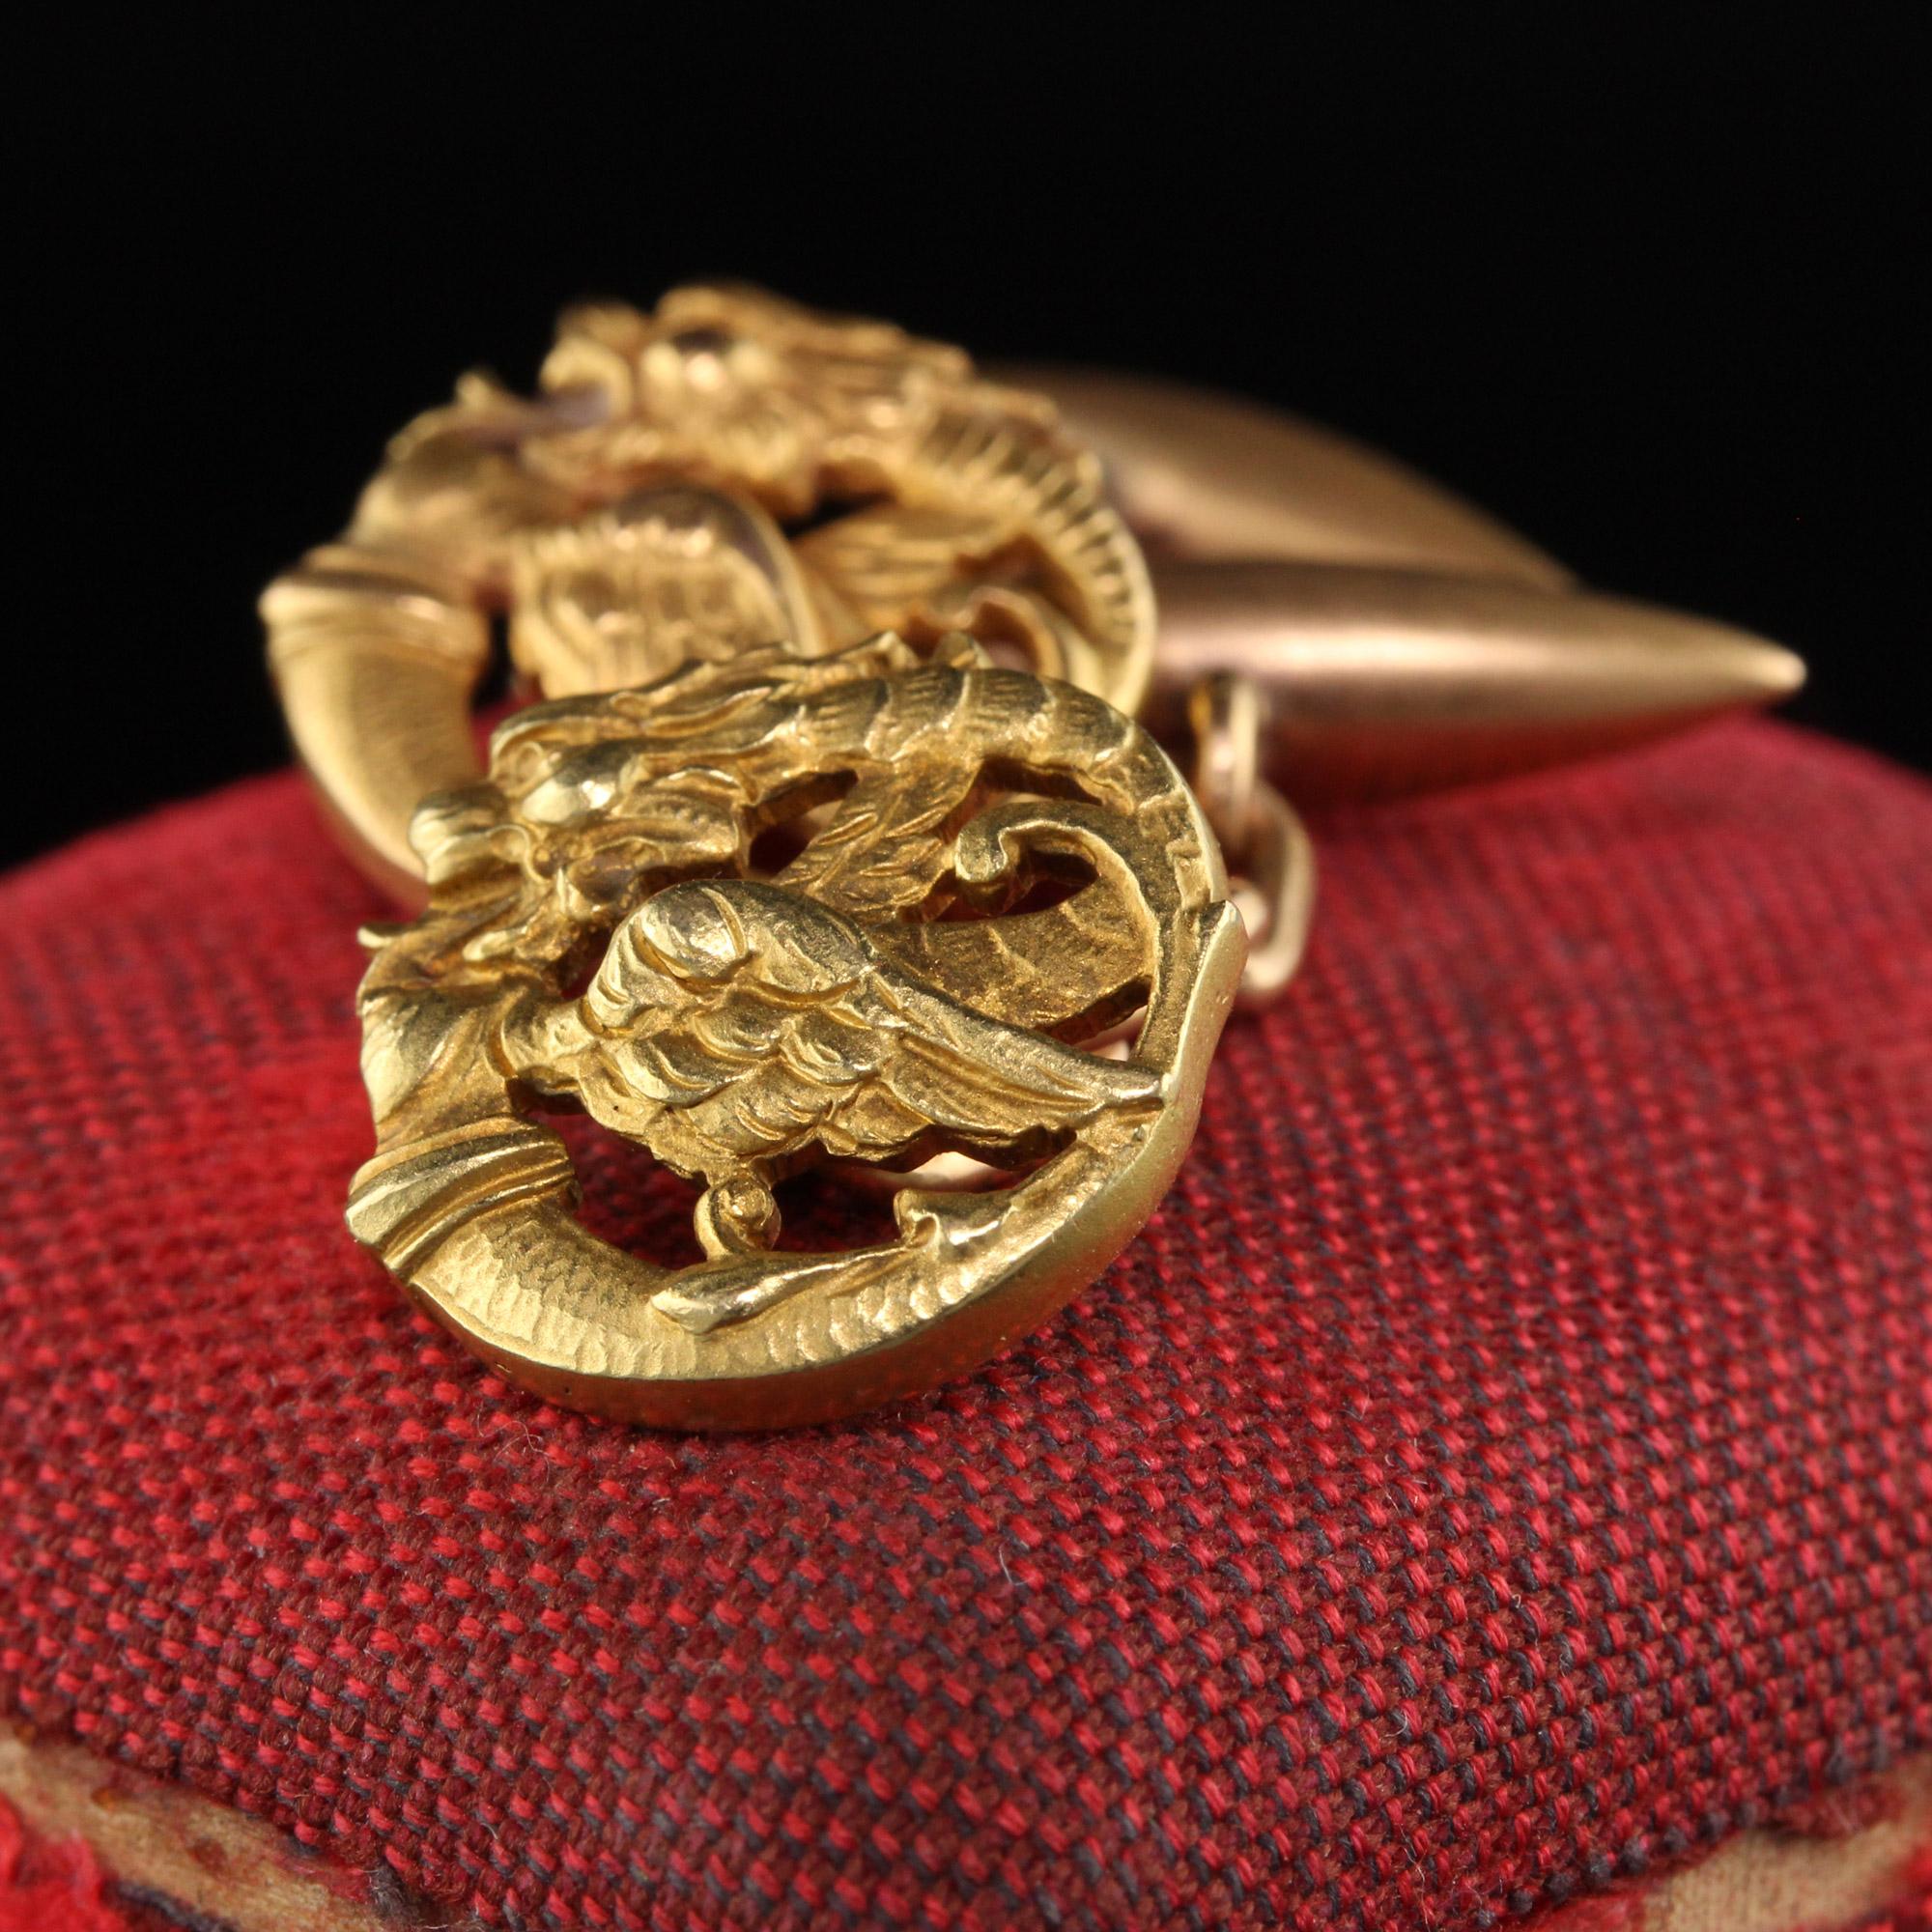 Gorgeous Antique Victorian 18K Yellow Gold Griffin Cufflinks. These beautiful cufflinks still have their original detail on them and are in great condition. These mythical beasts were considered the kings of beasts and guarded treasures and